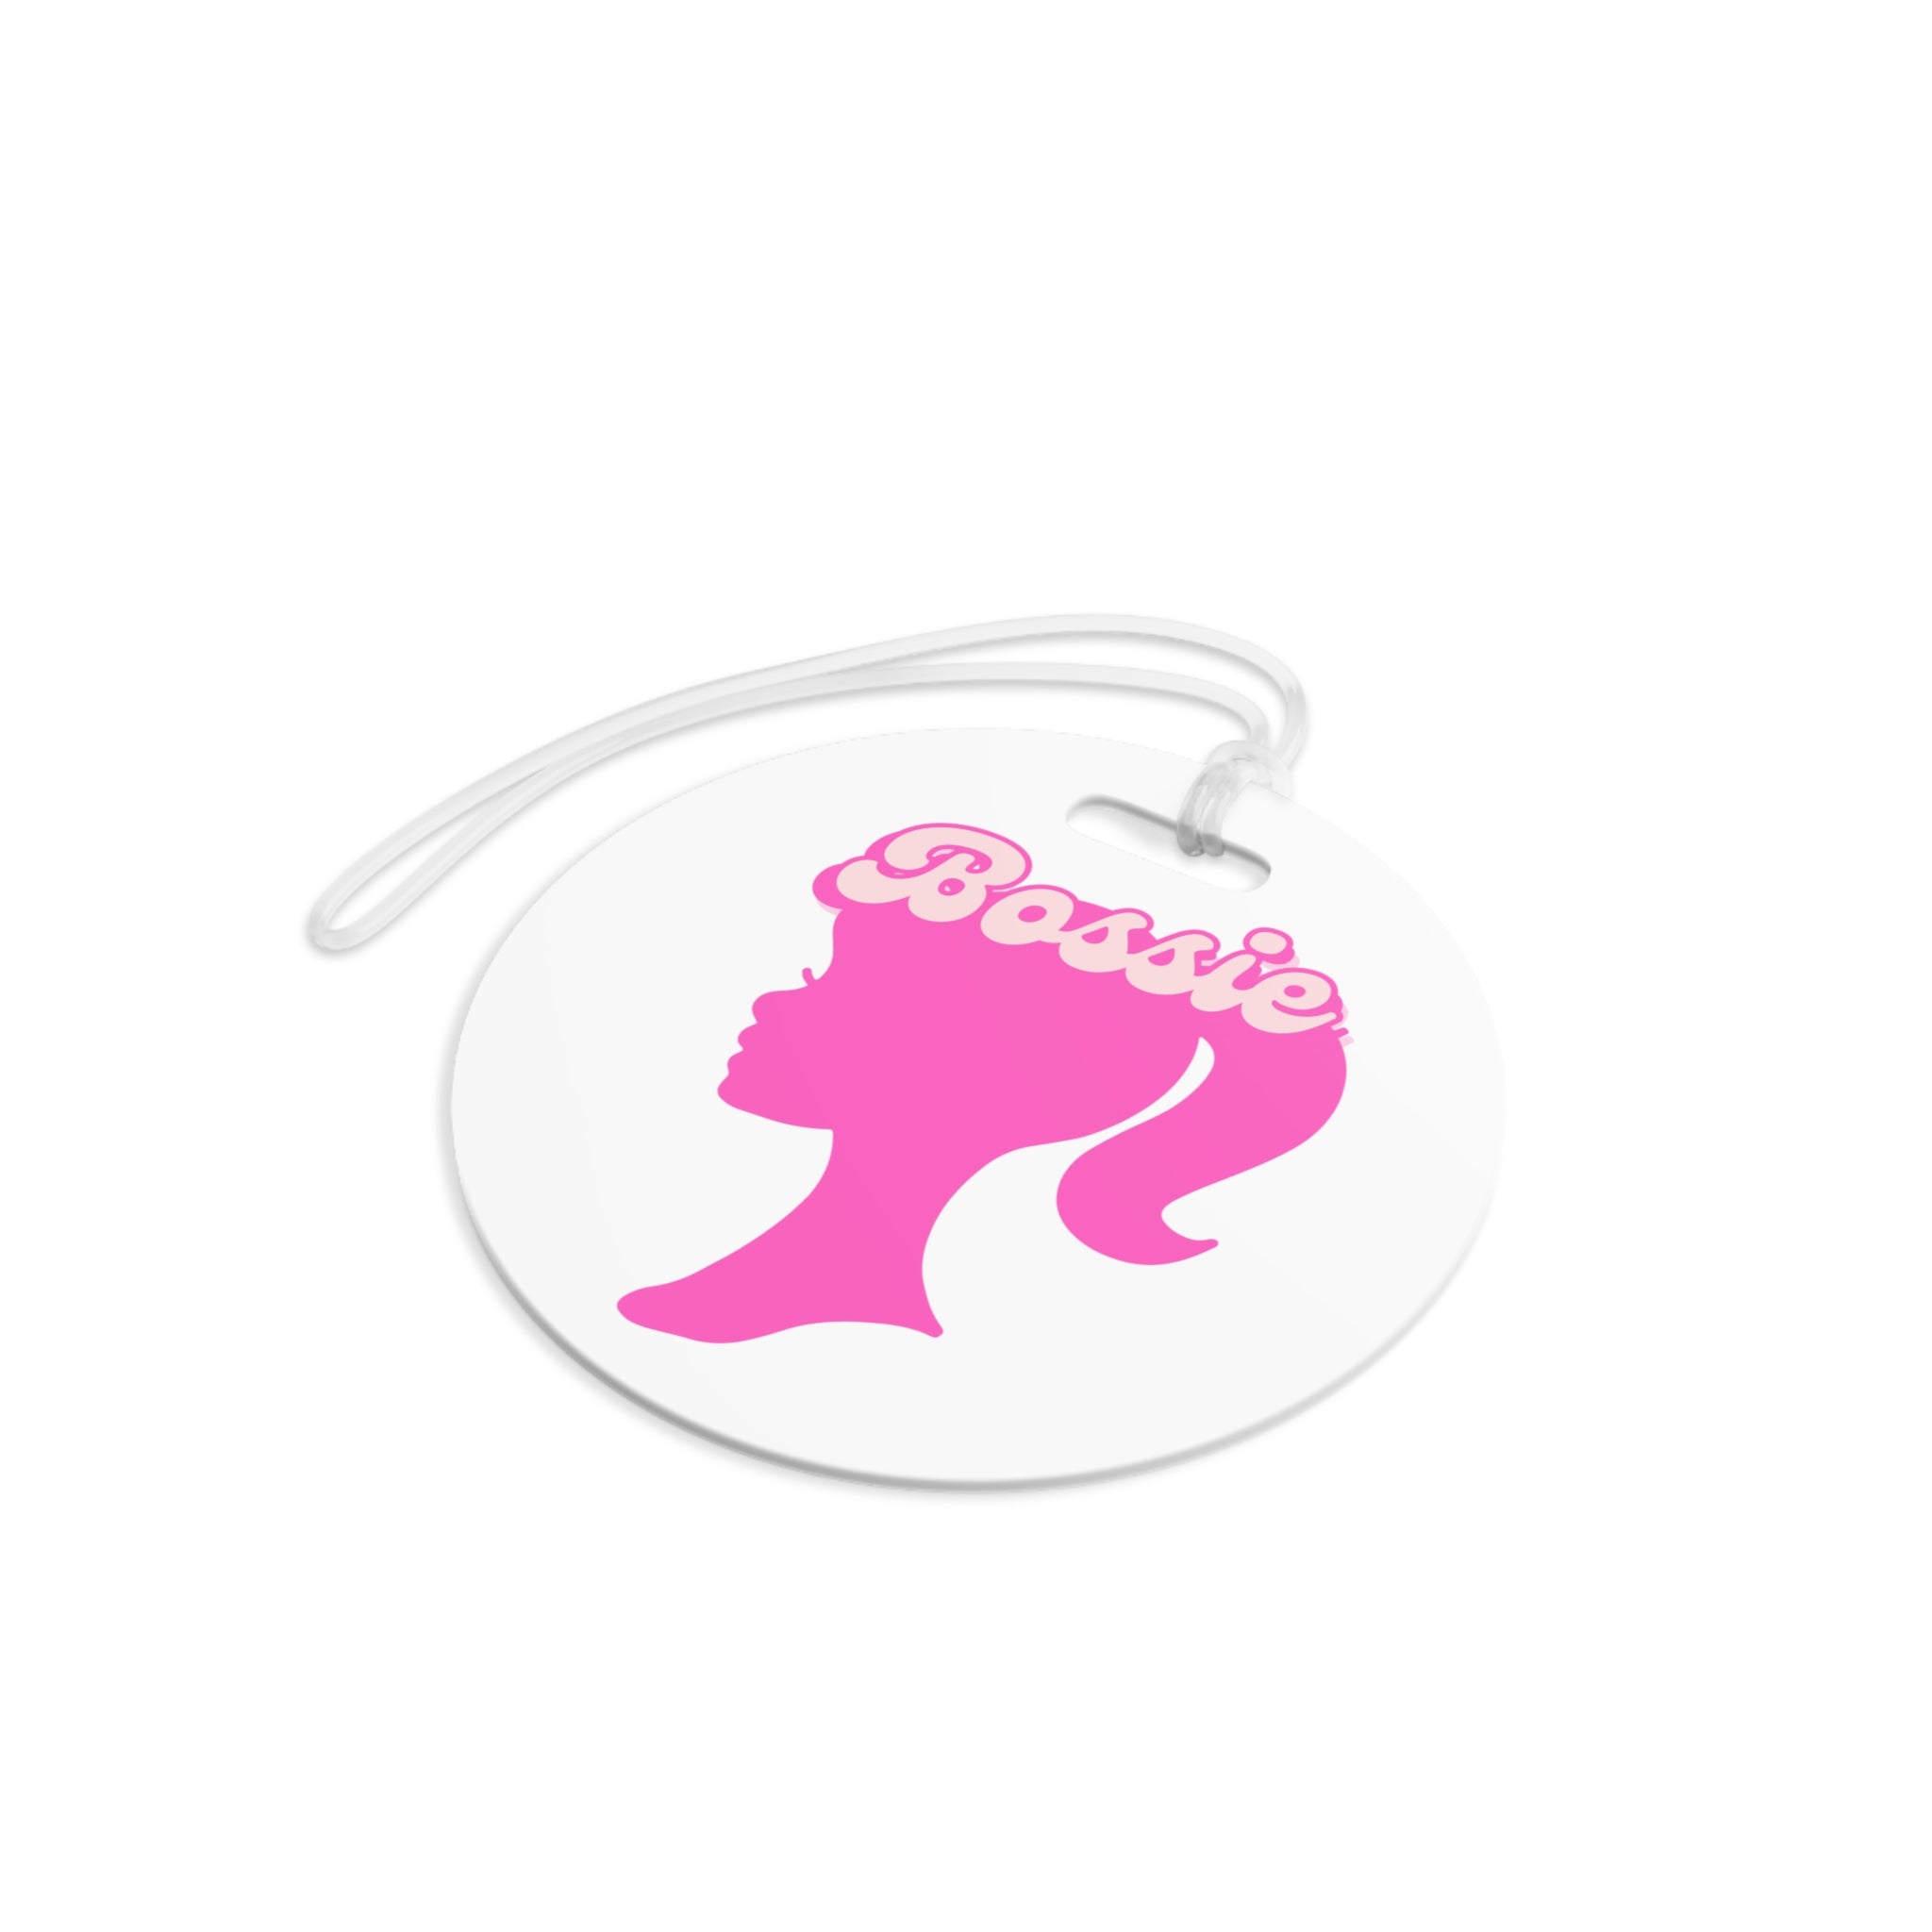  Bossie (Barbie Image) Funny Luggage Tag in white, Barbie Bag Tag, Funny Travel Lover Gift, Gift For Her Accessories